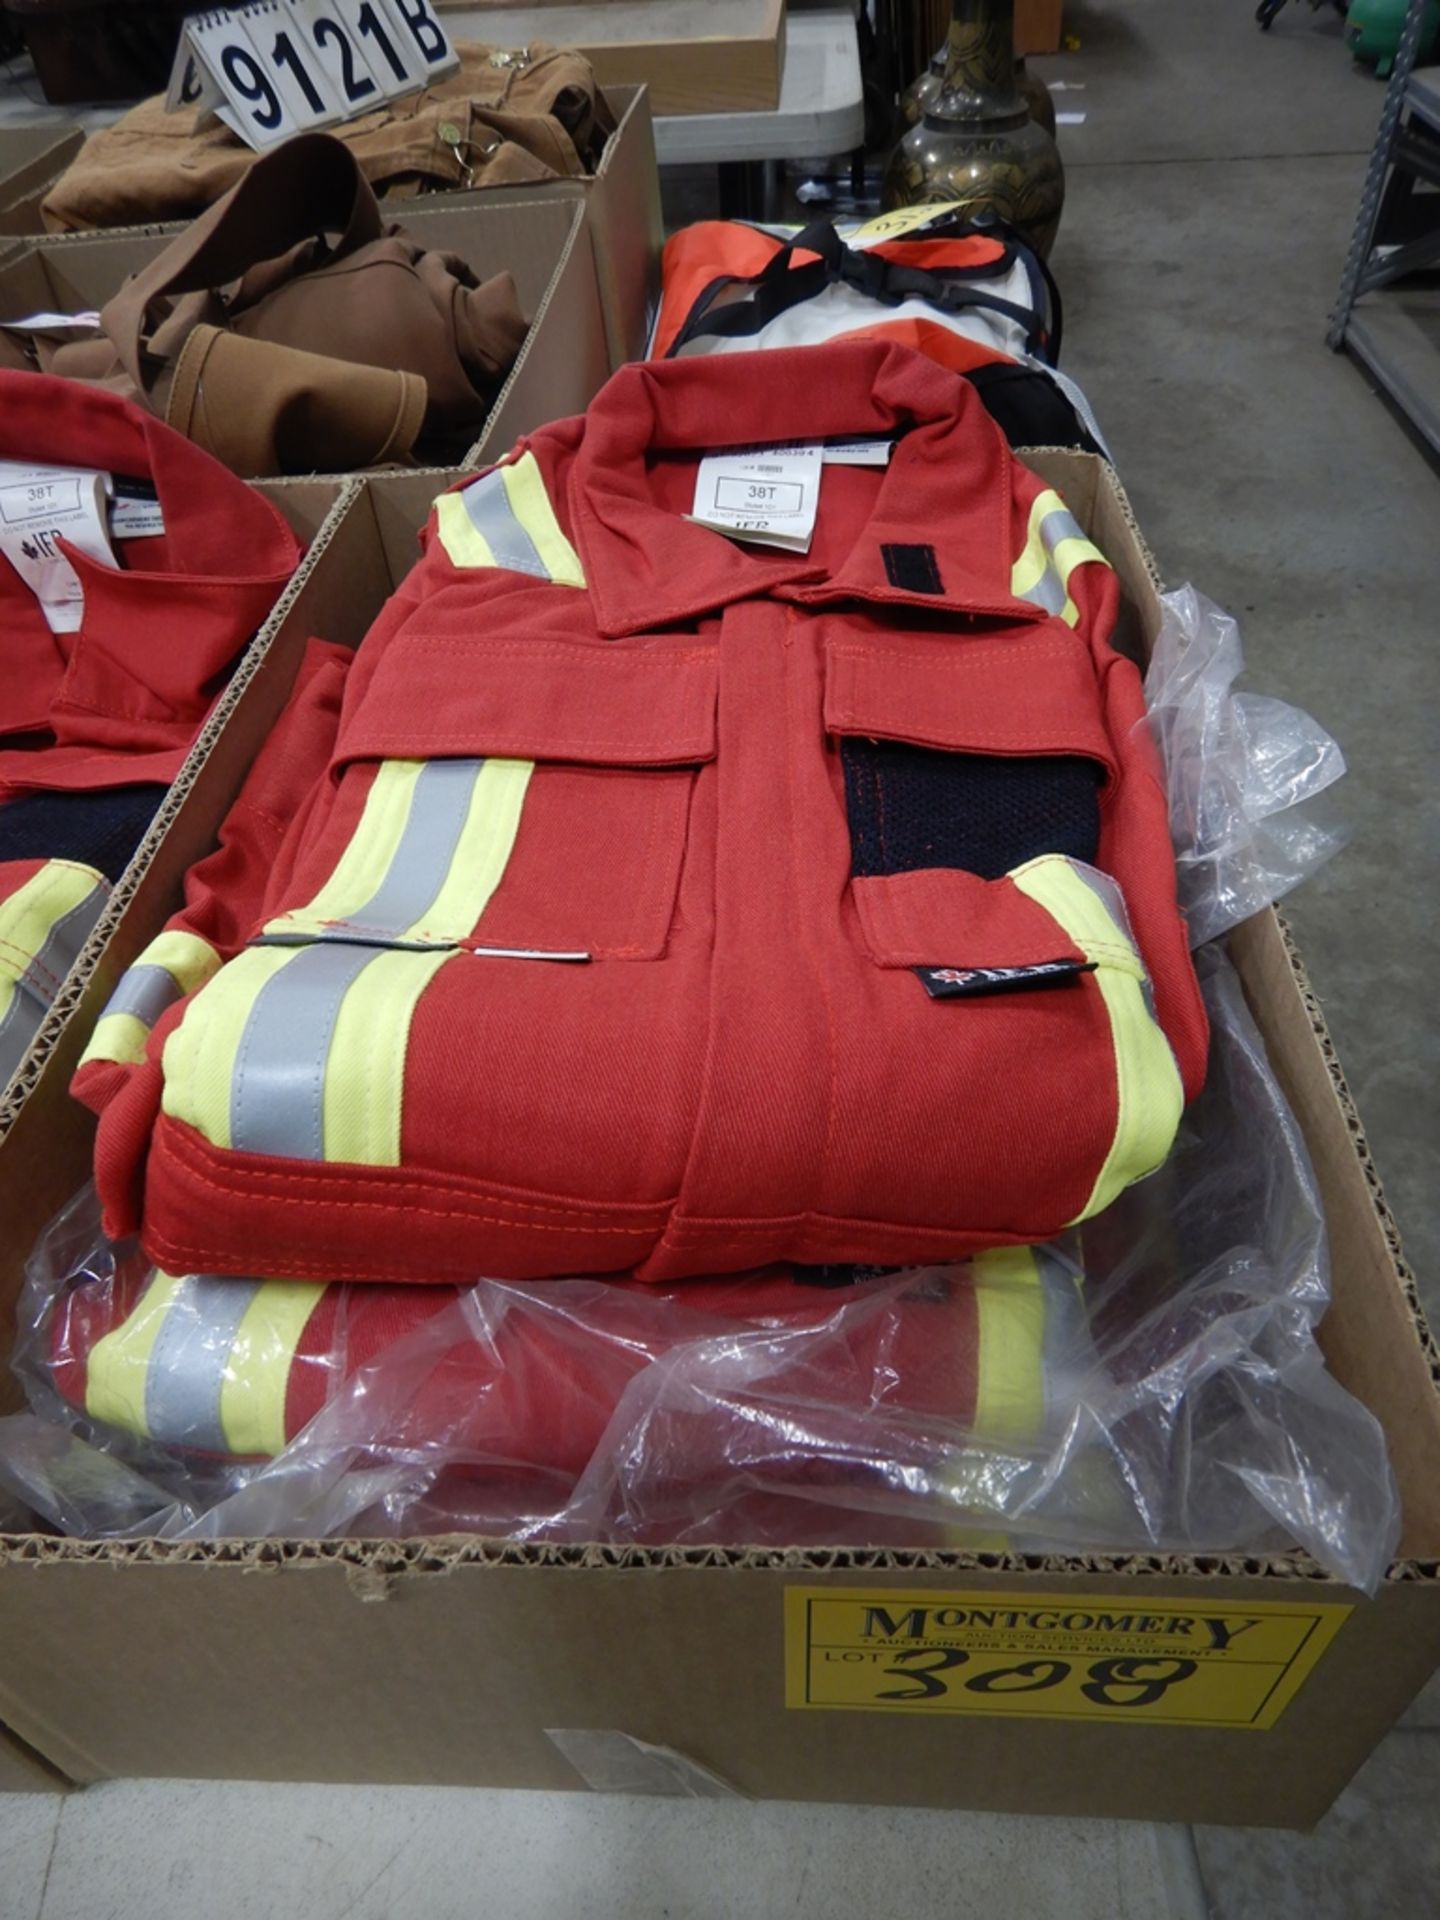 3-PR IFR SAFETY COVERALLS, RED, SIZE 38T